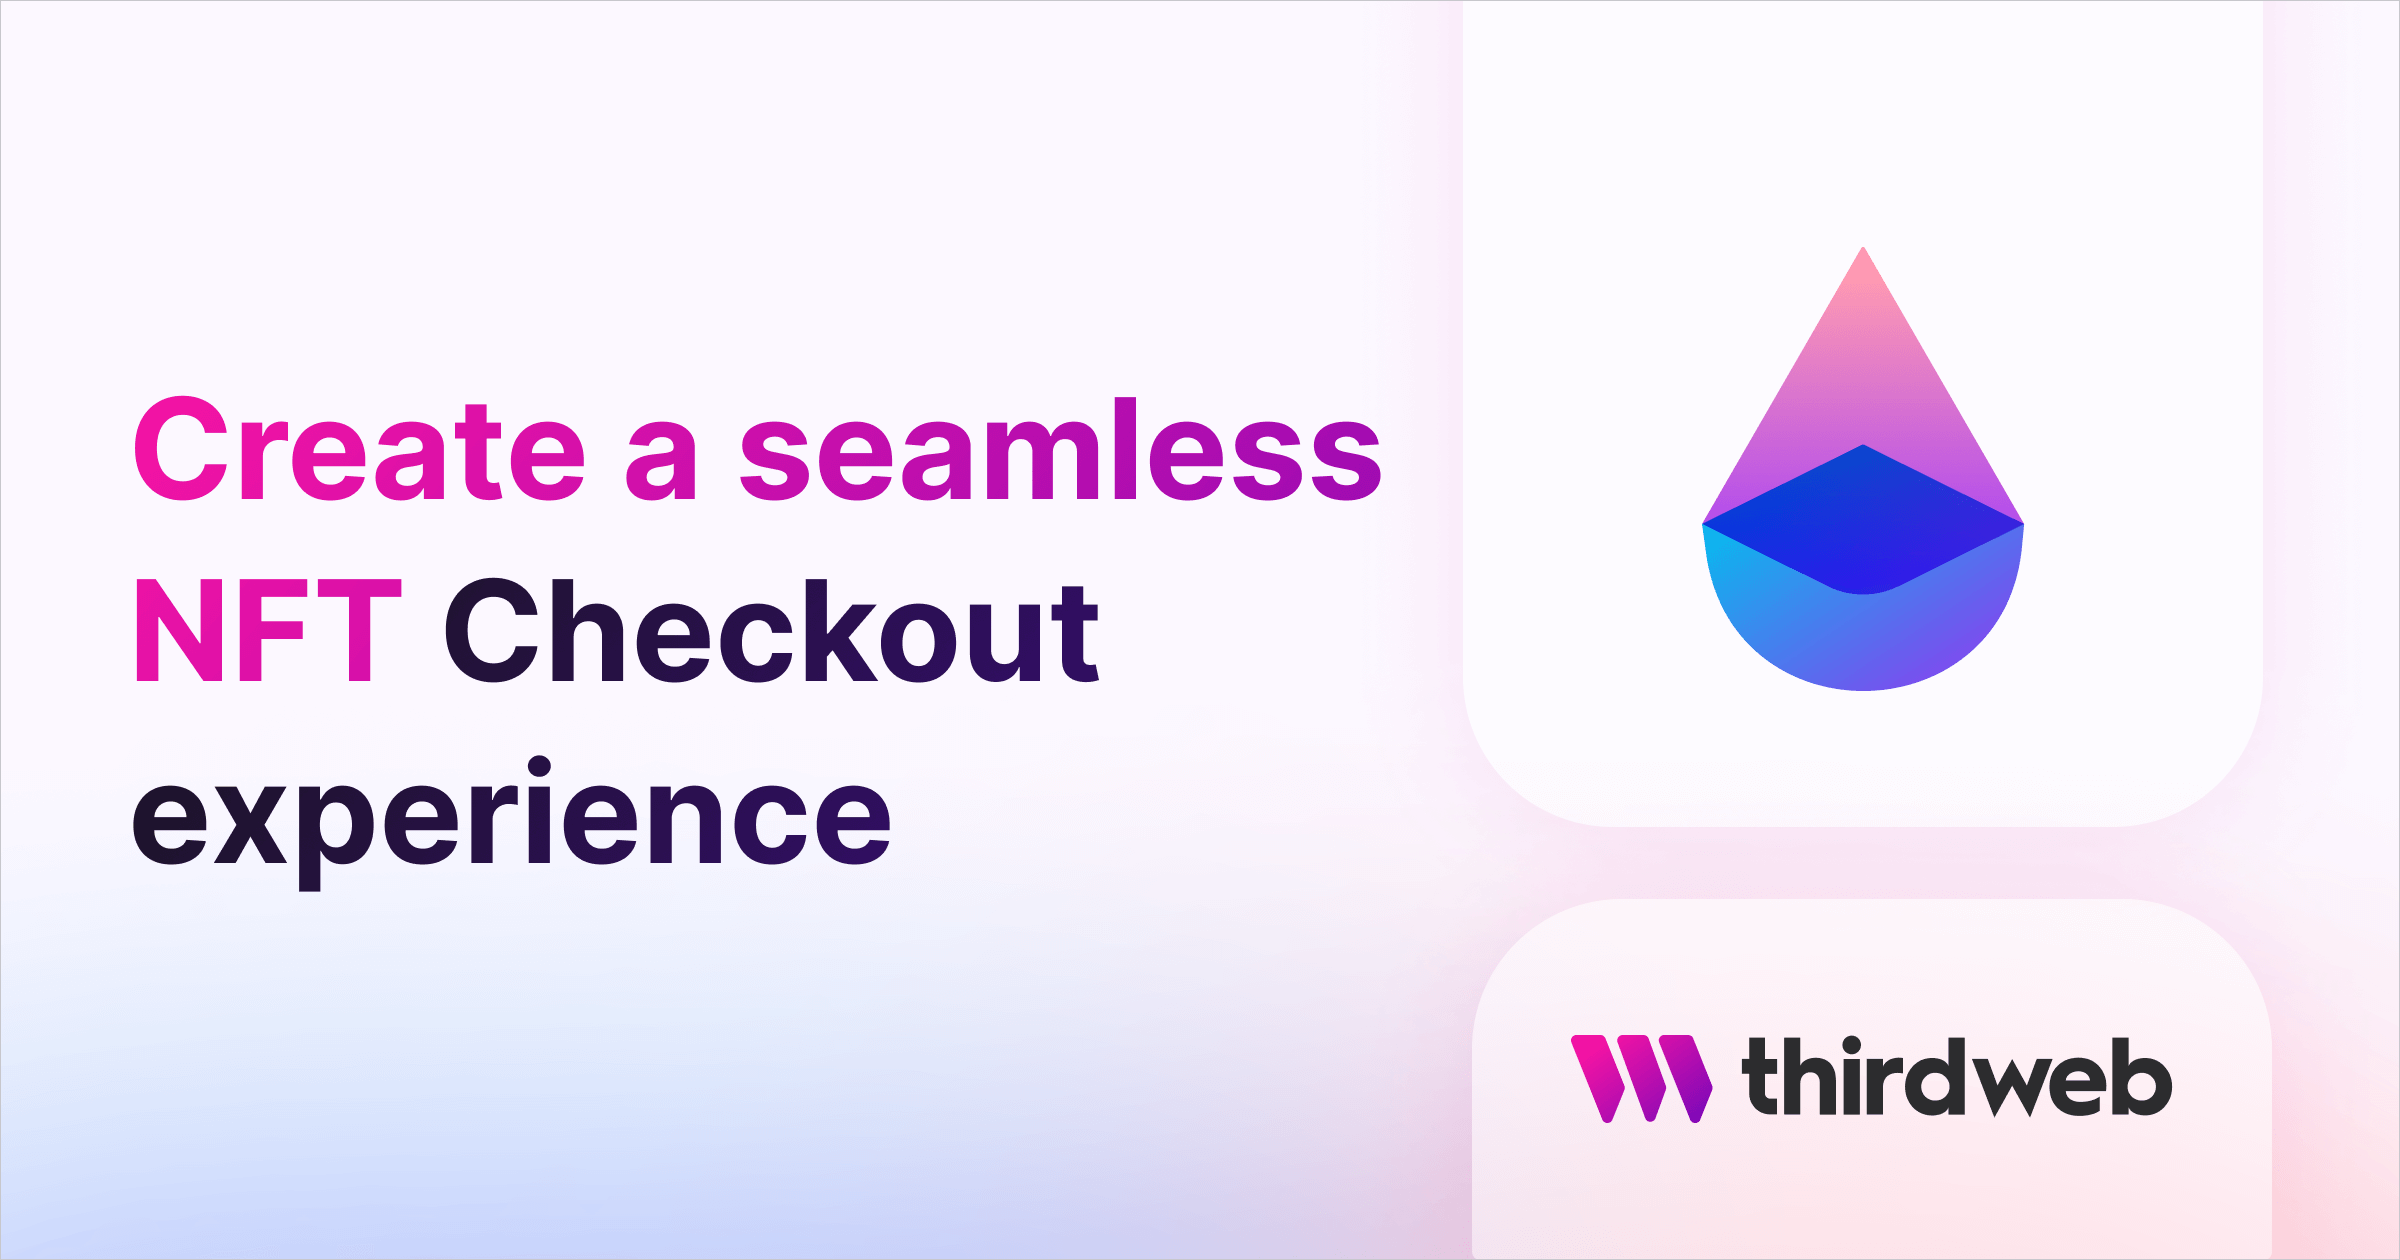 How to create a seamless NFT Checkout experience  - thirdweb Guides